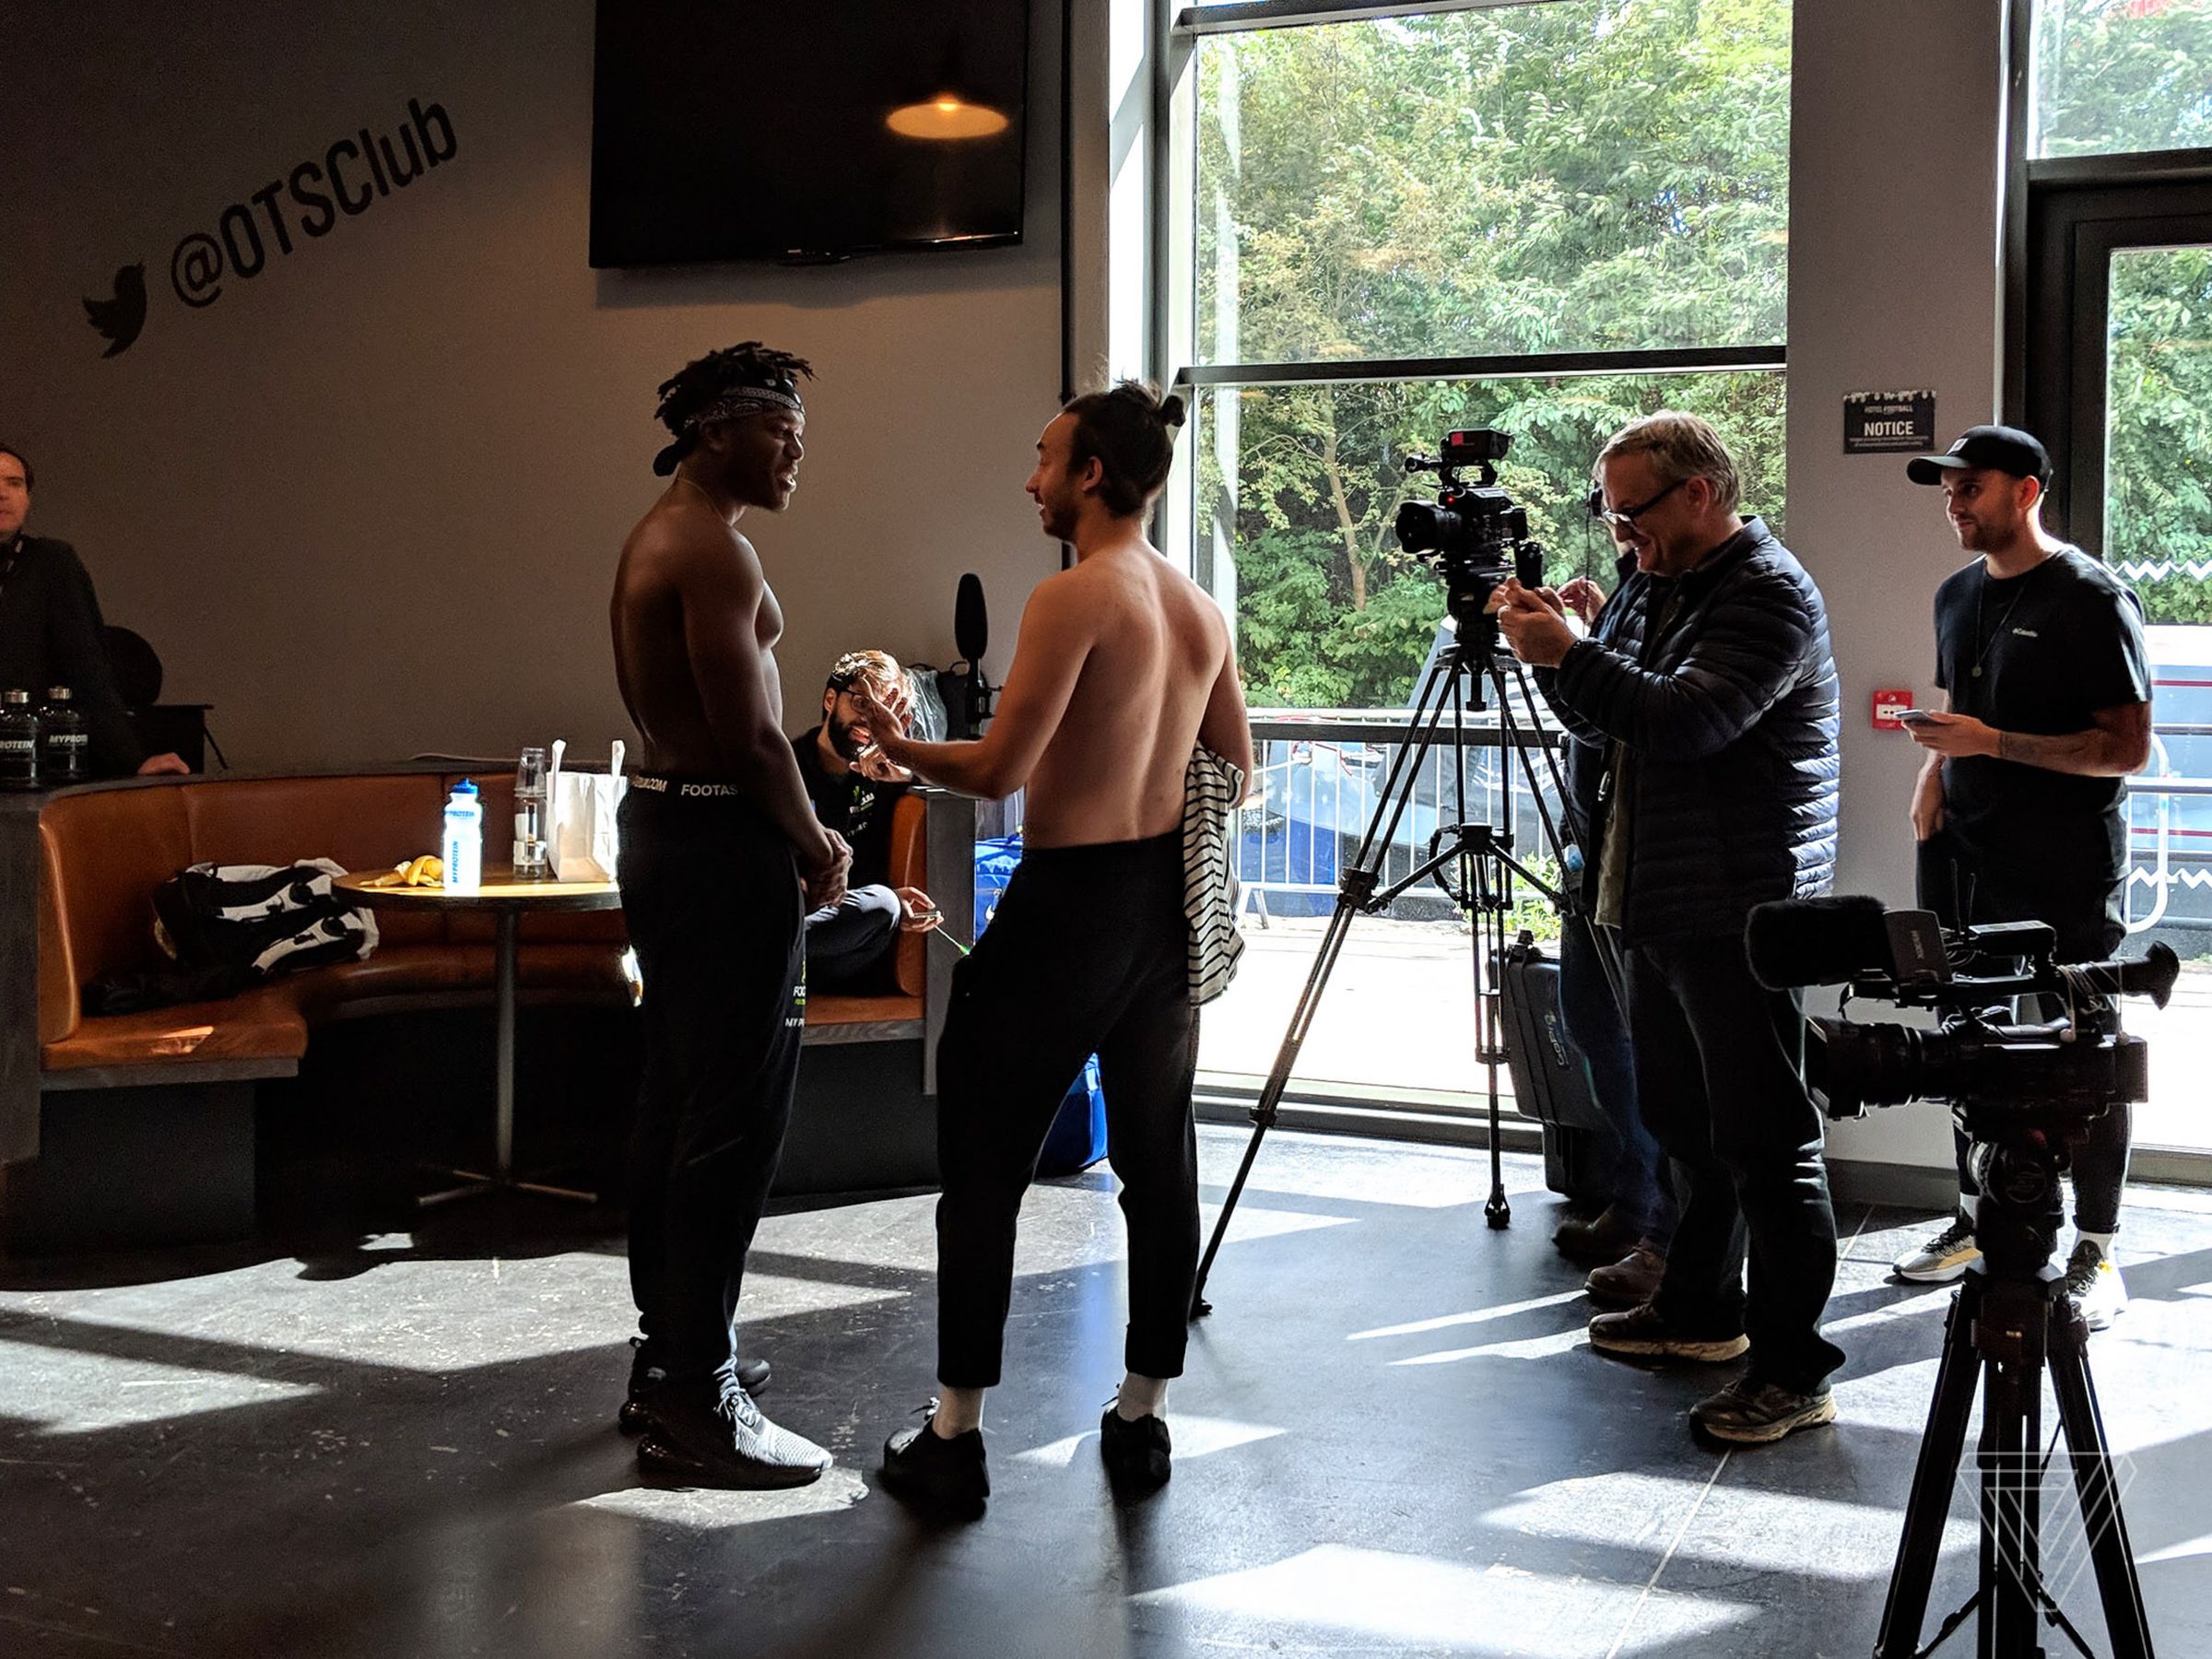 KSI doing a pre-fight interview with his shirt off, at the interviewer’s request. Macho behavior is apparently infectious.